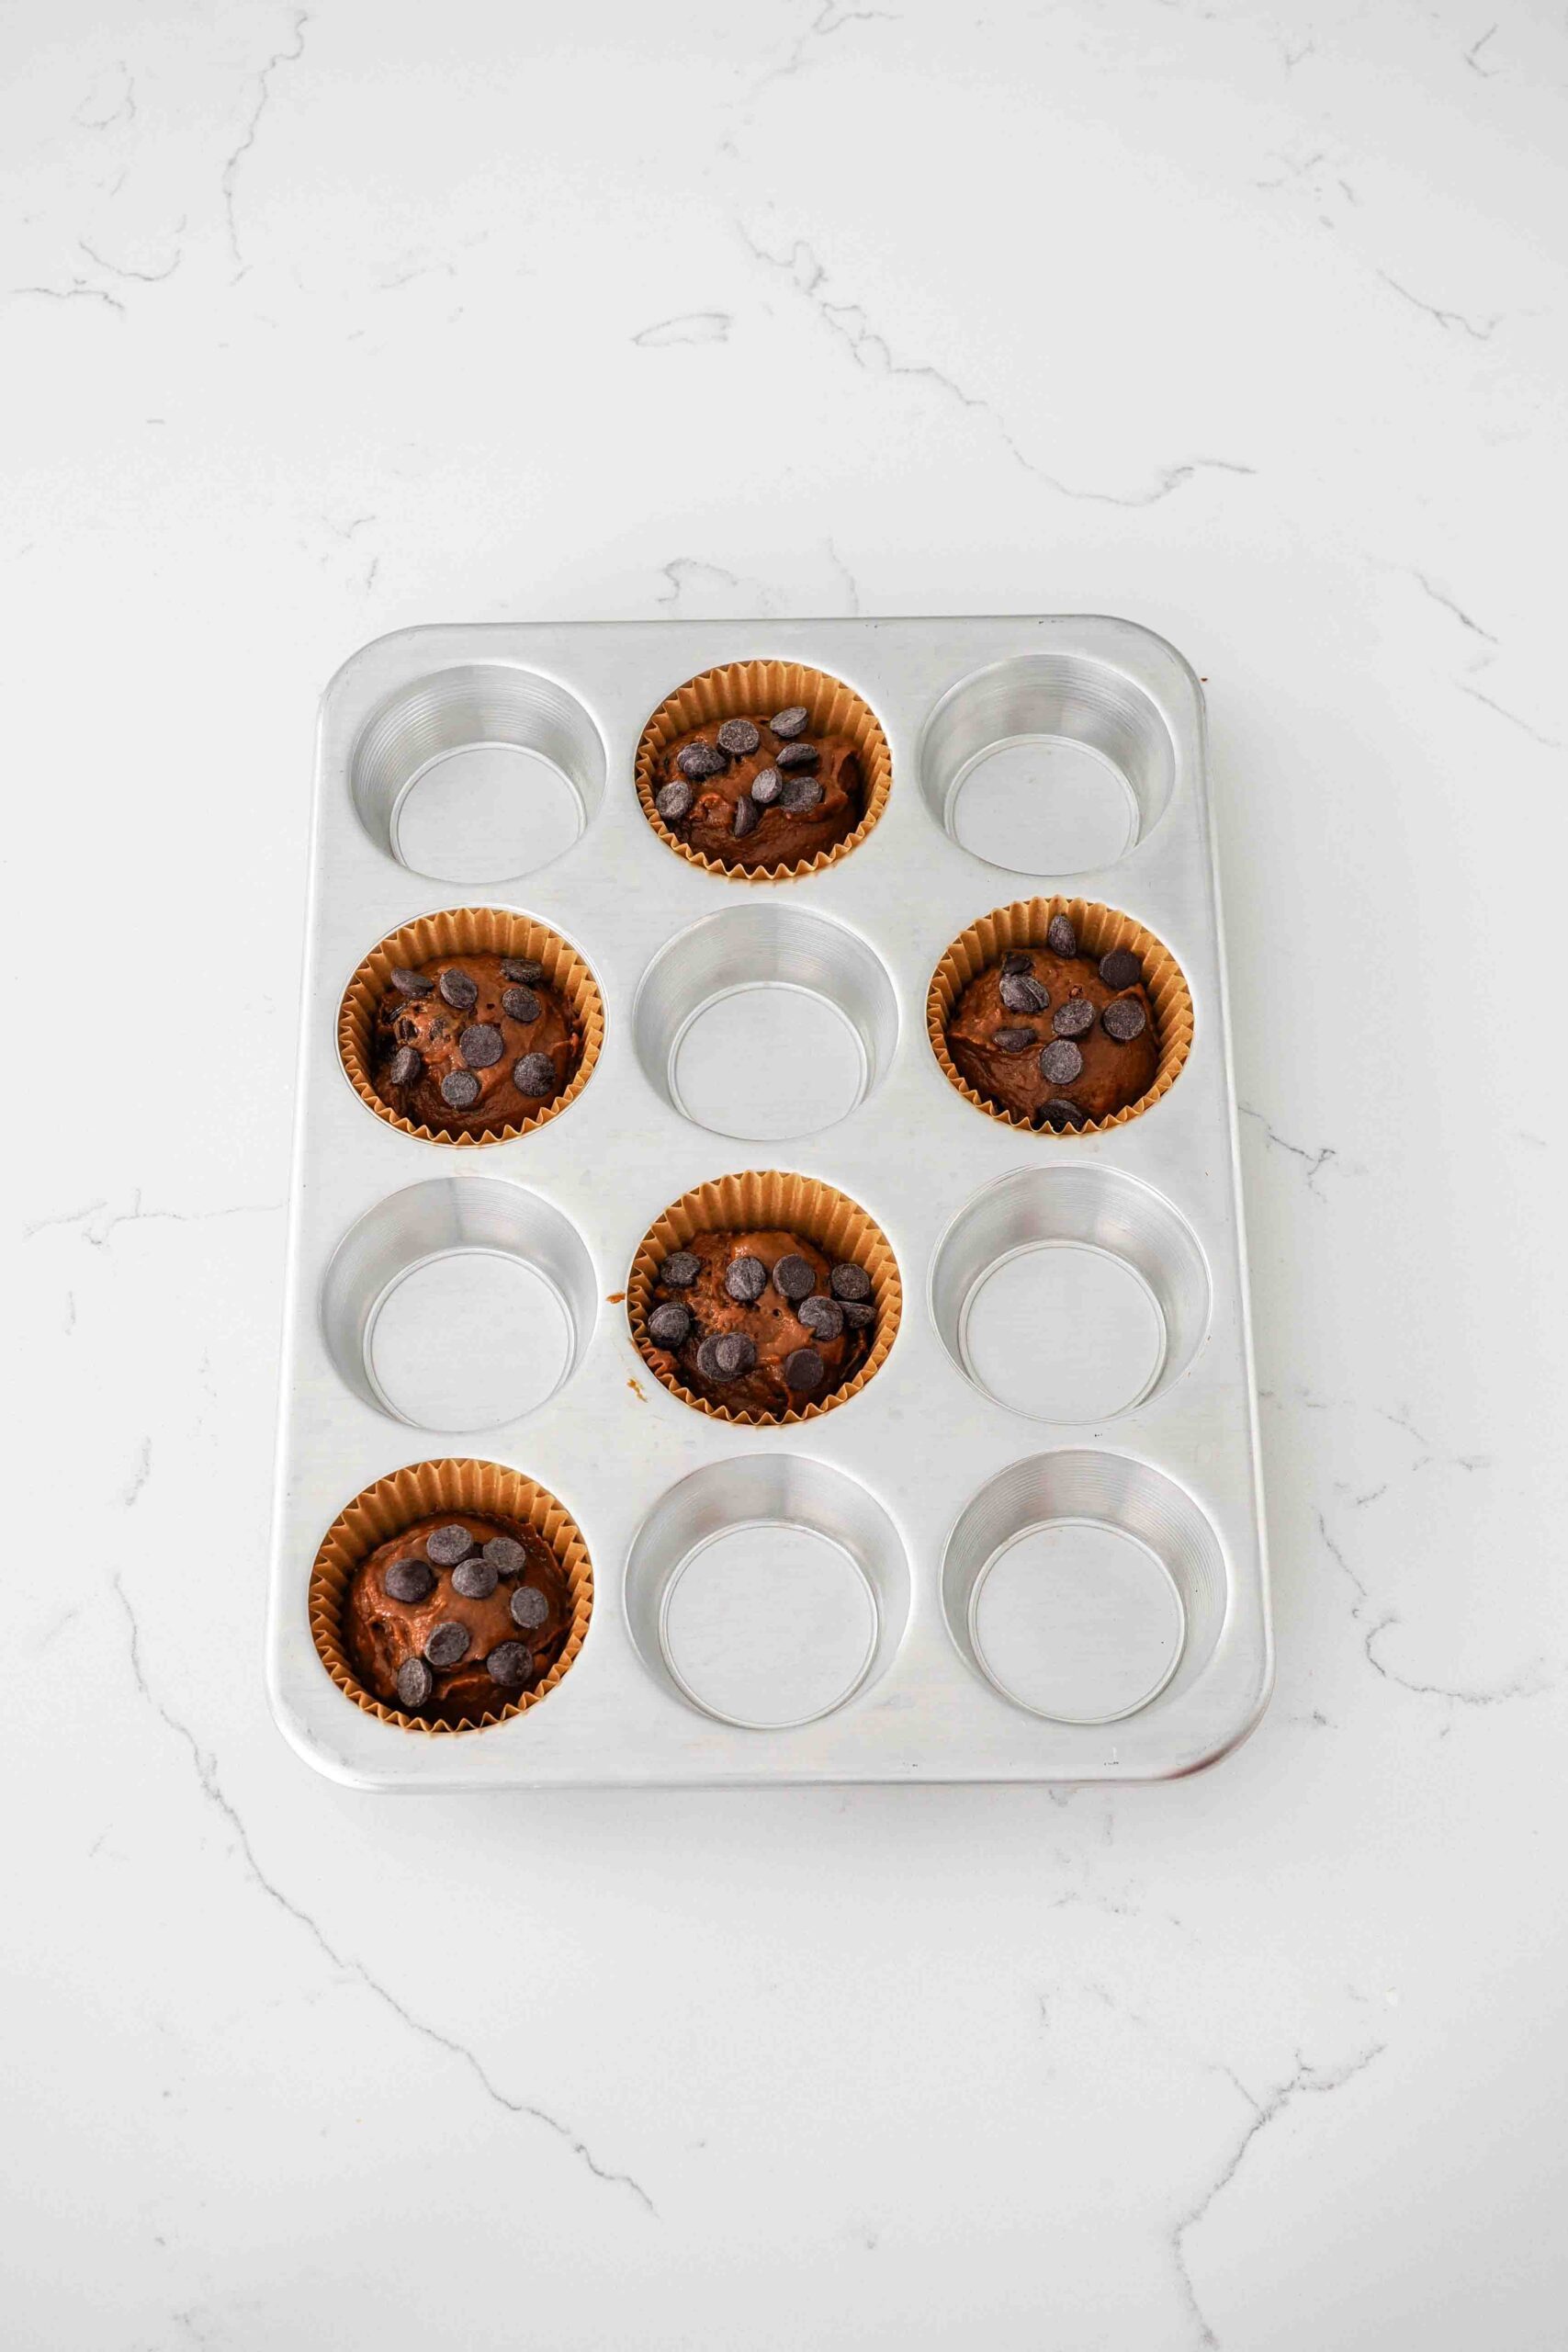 Chocolate pumpkin muffins in paper muffin cups and topped with extra chocolate chips.